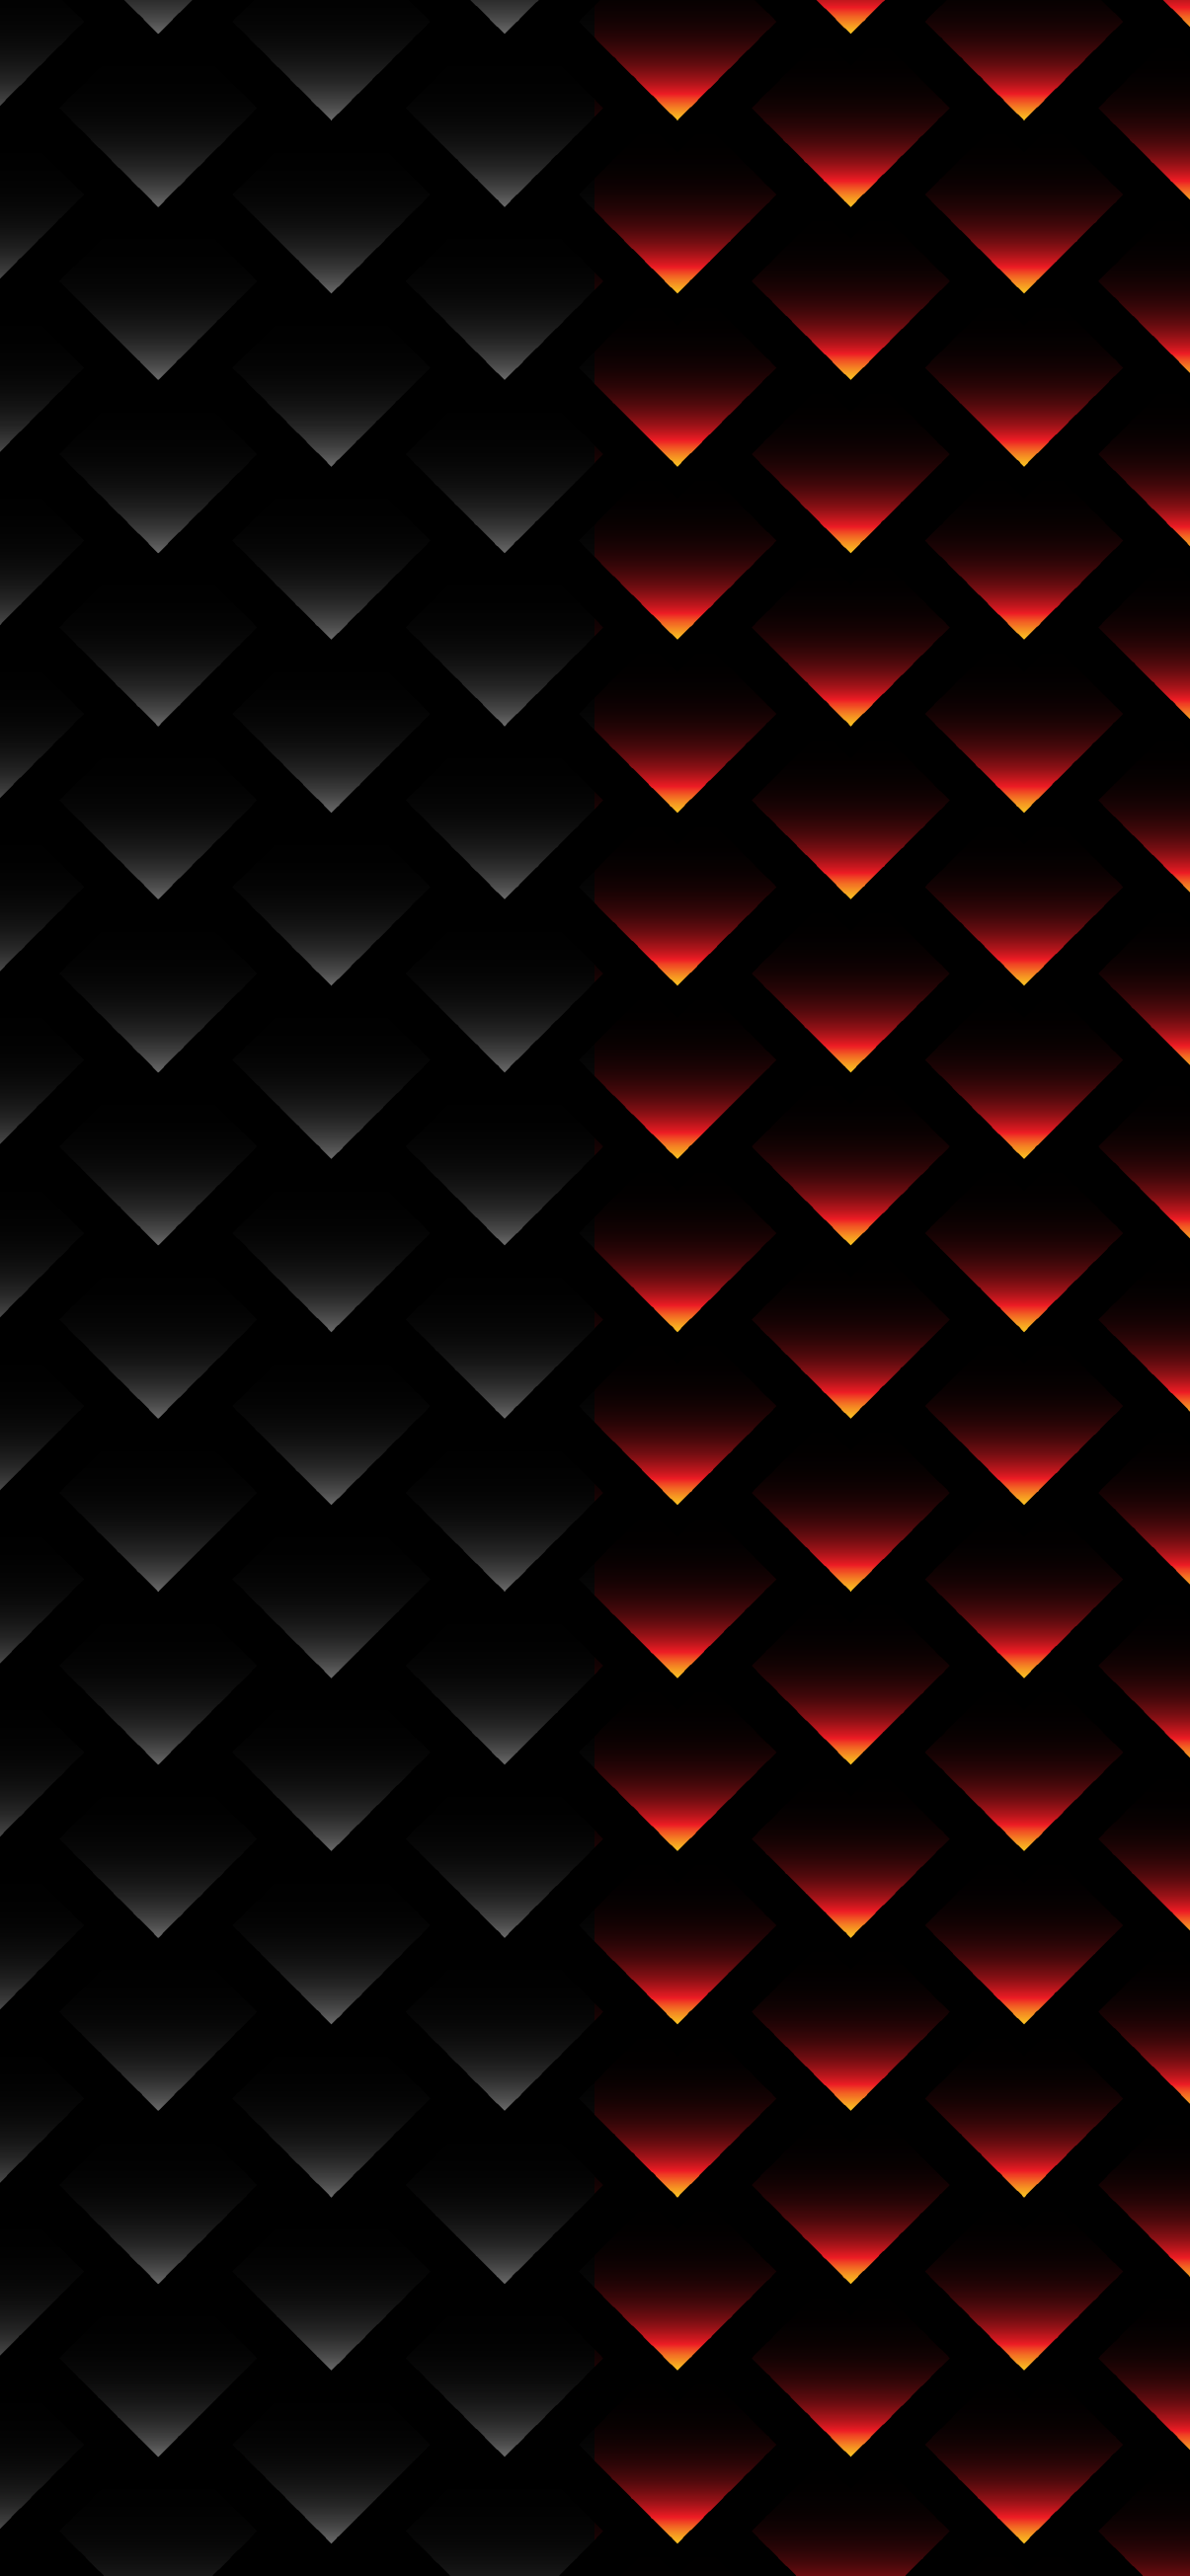 30+ Best iOS 14 Dual Wallpapers for iPhone 11 Pro (Max)